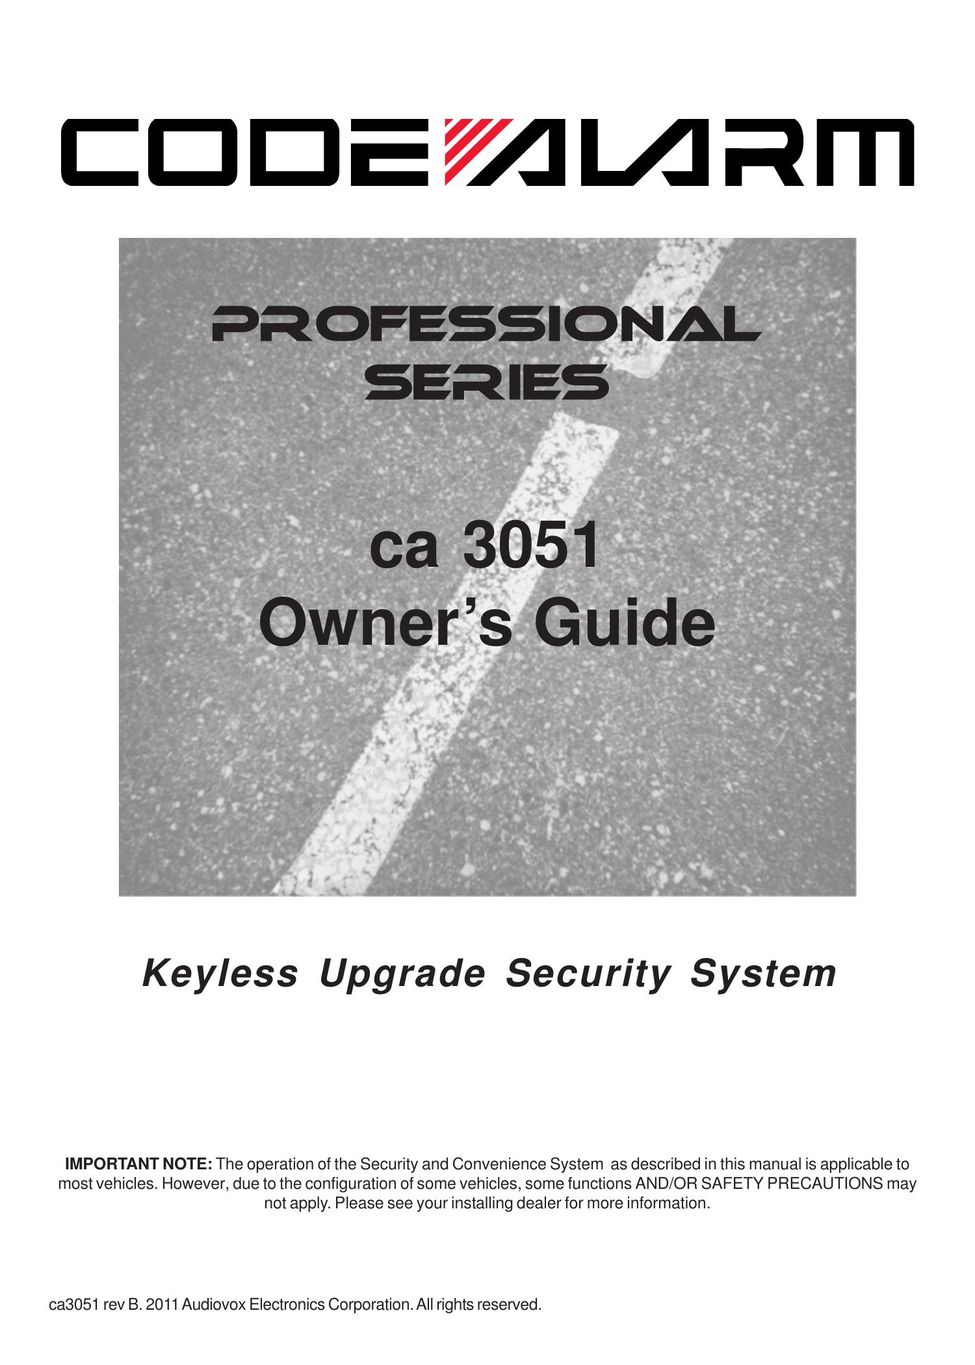 Audiovox CA 3051 Home Security System User Manual